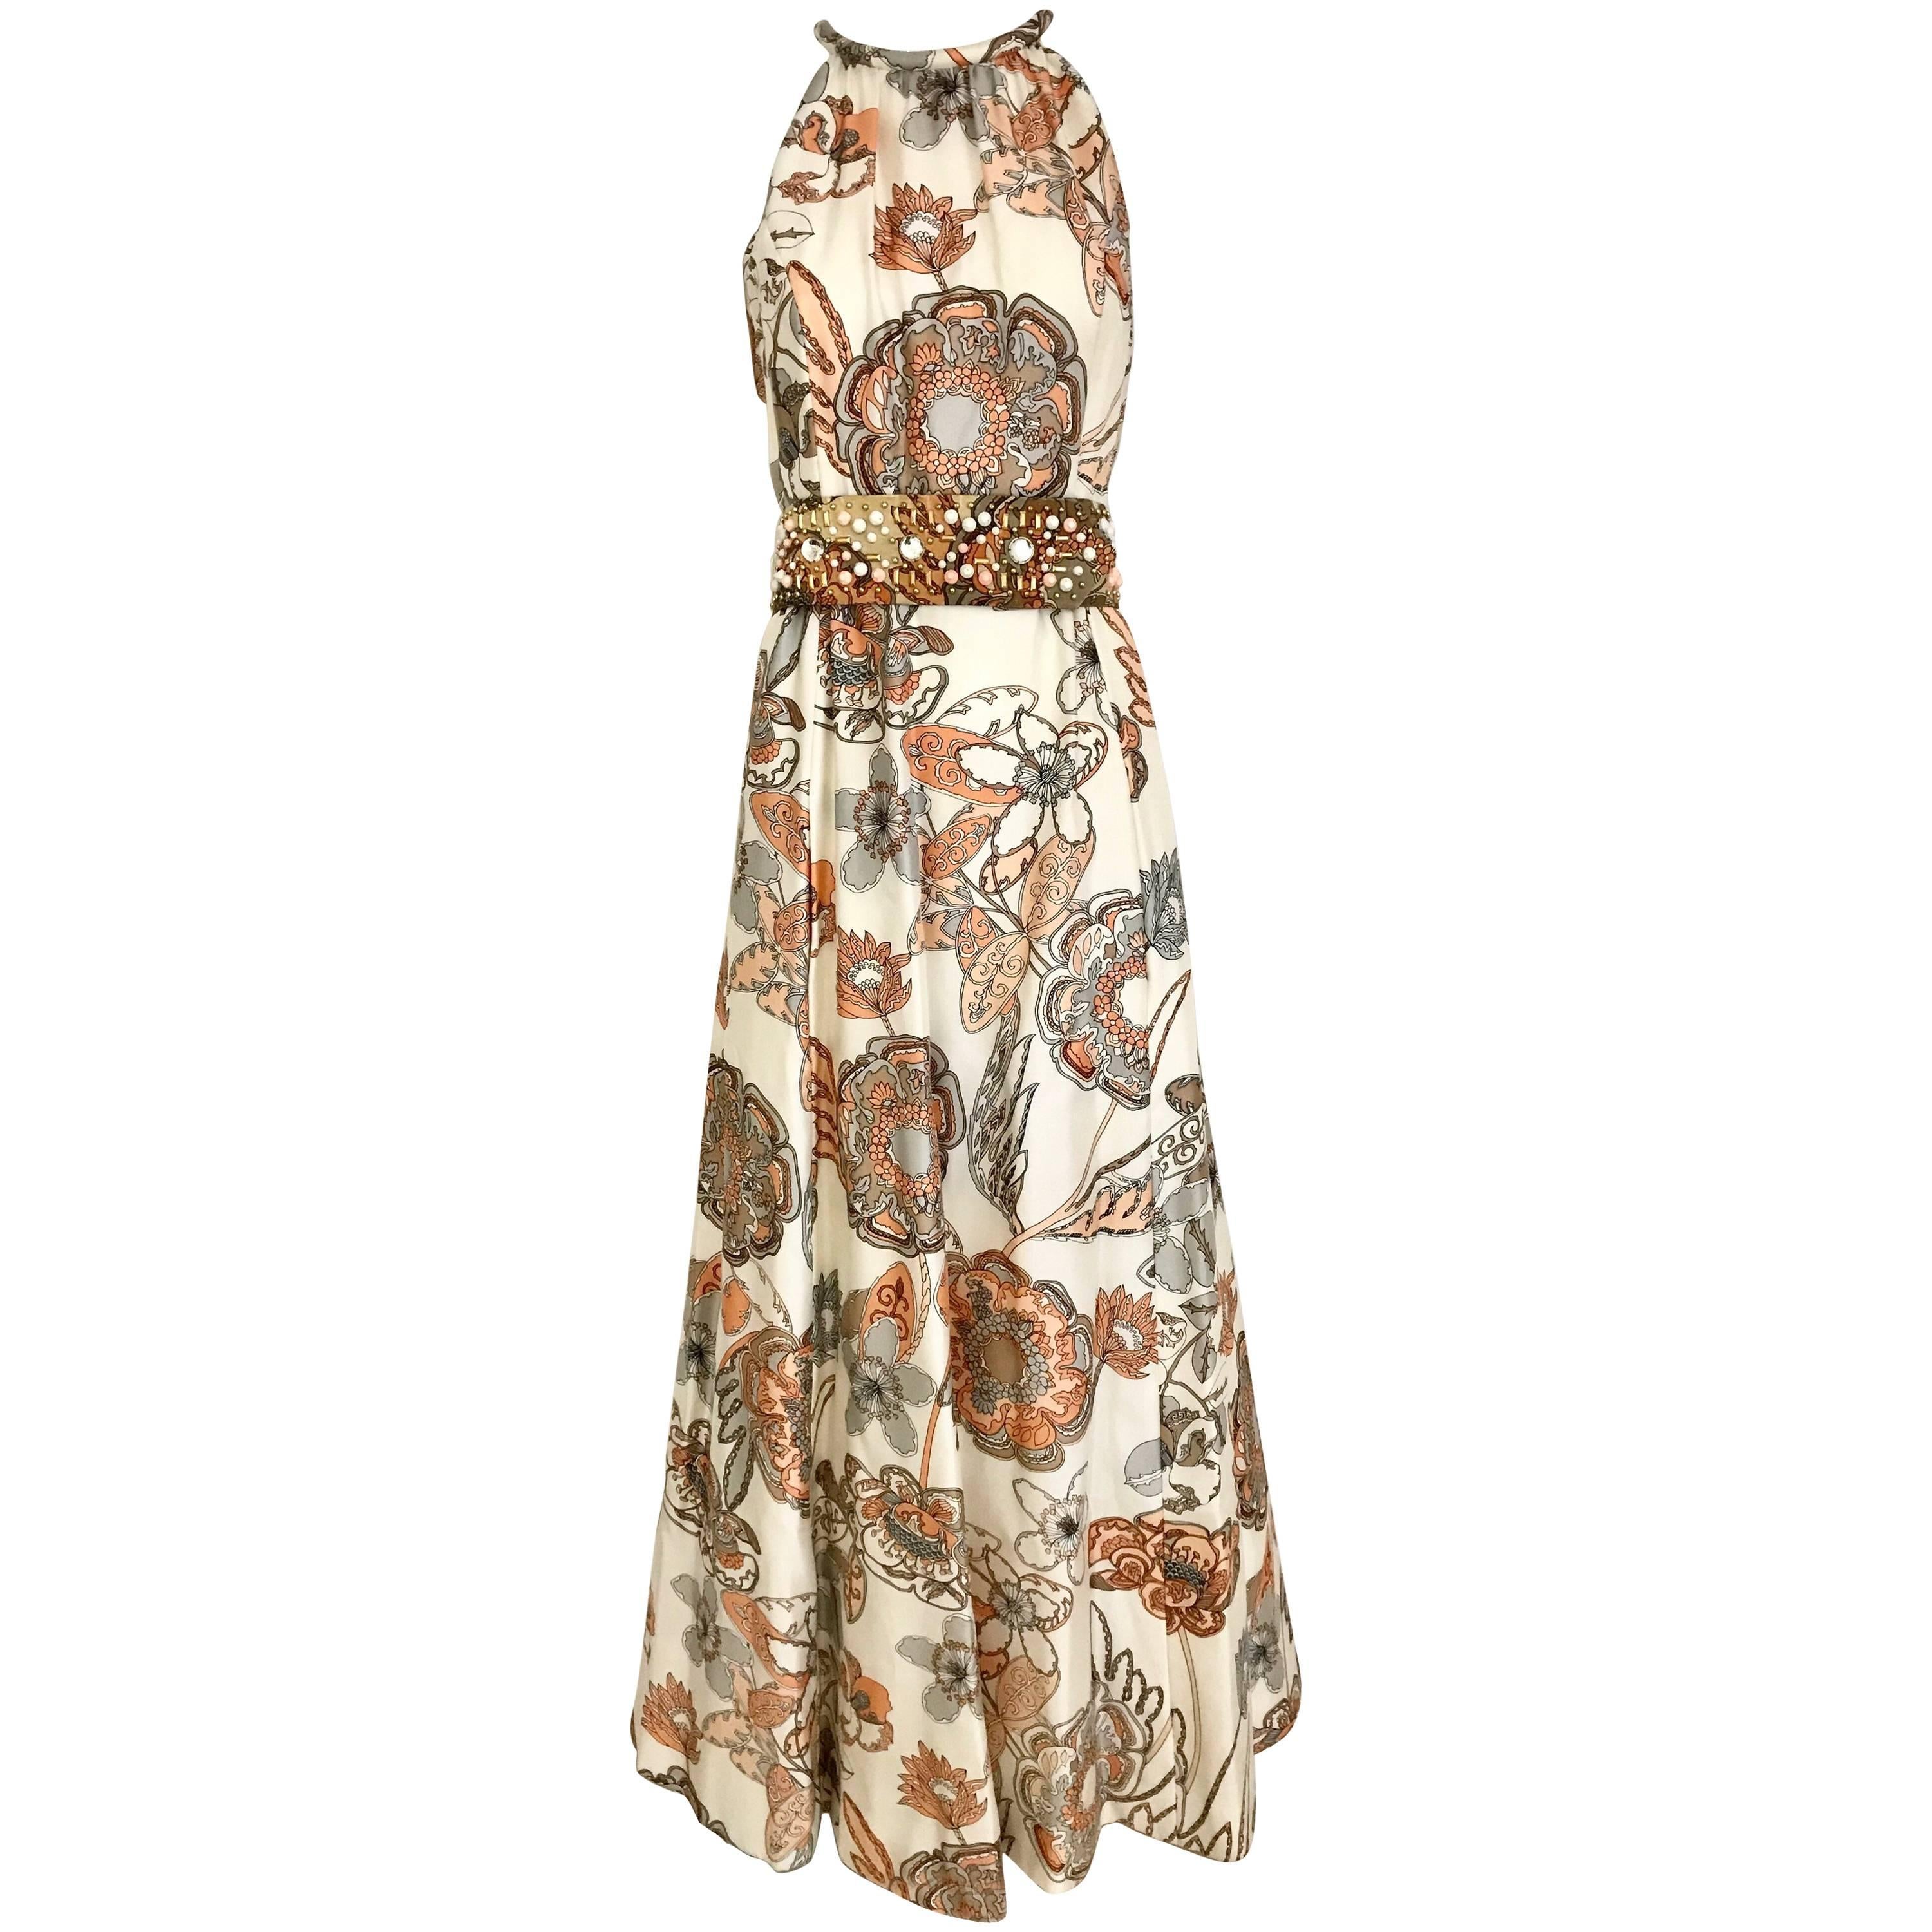 1970s Malcolm Starr Creme and Peach Floral Print Silk Dress with Jeweled belt